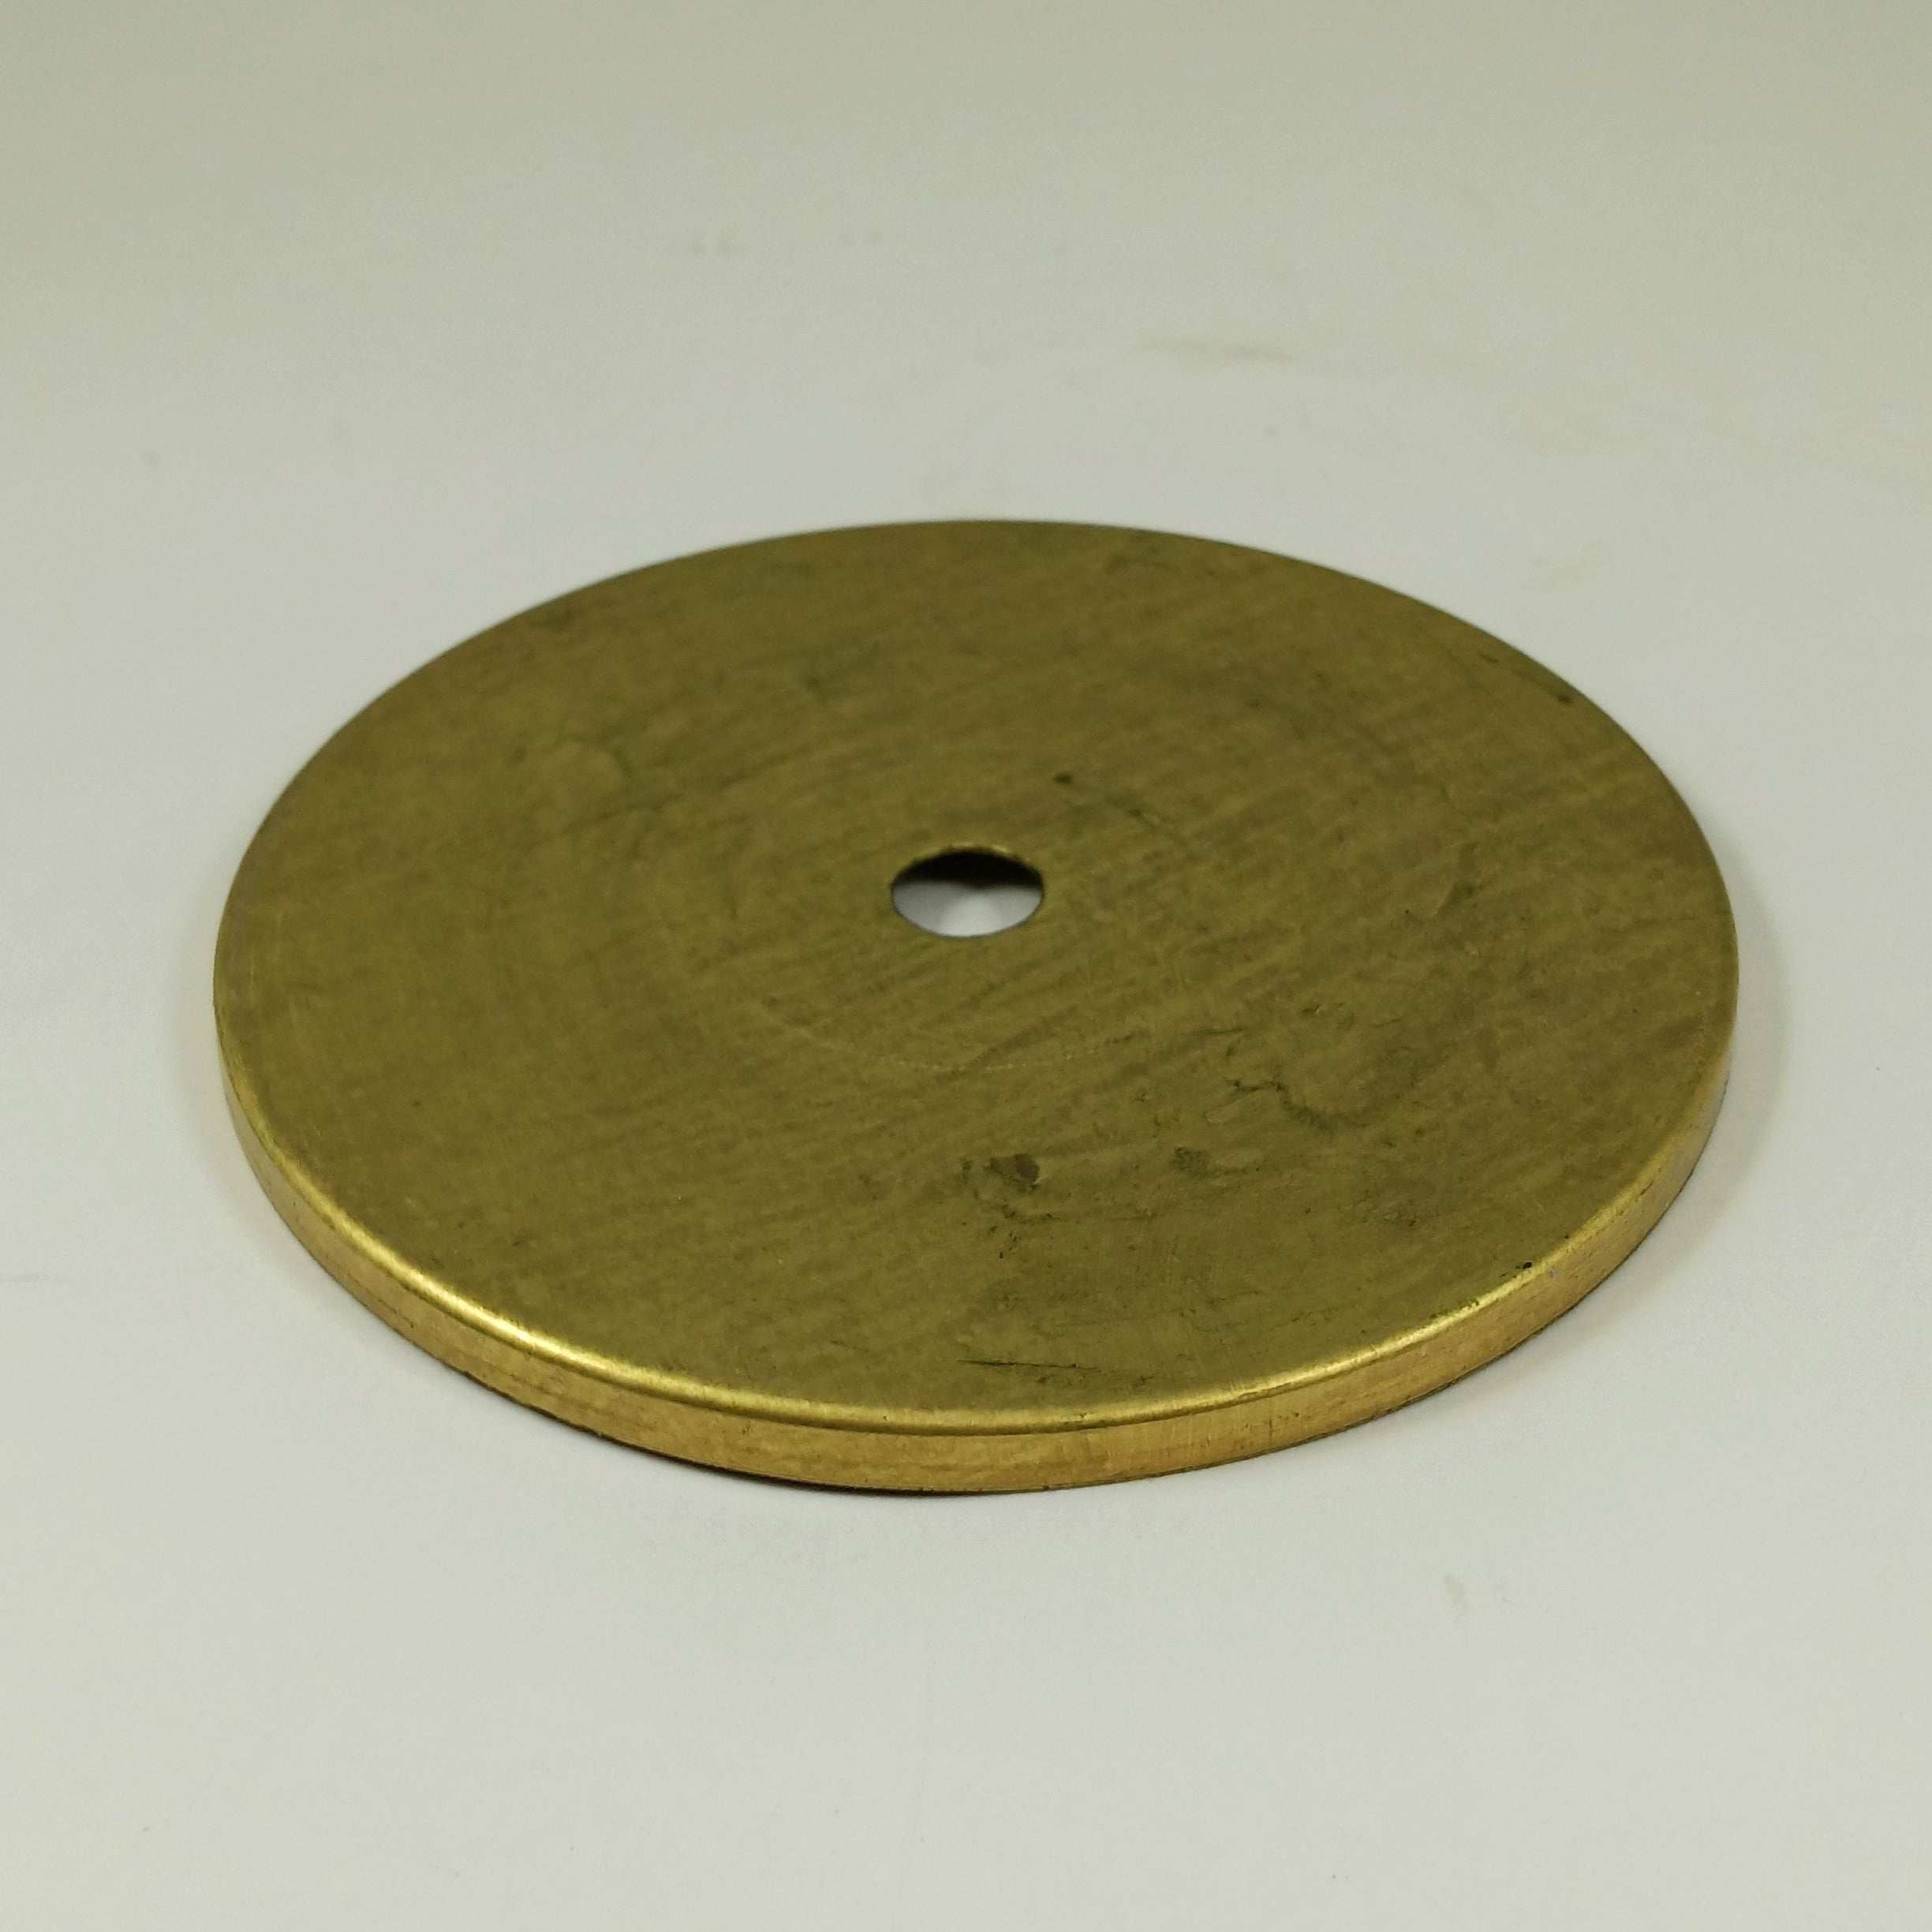 6-3/4" Round Flat Brass Plates - Unfinished Brass - Check Plate